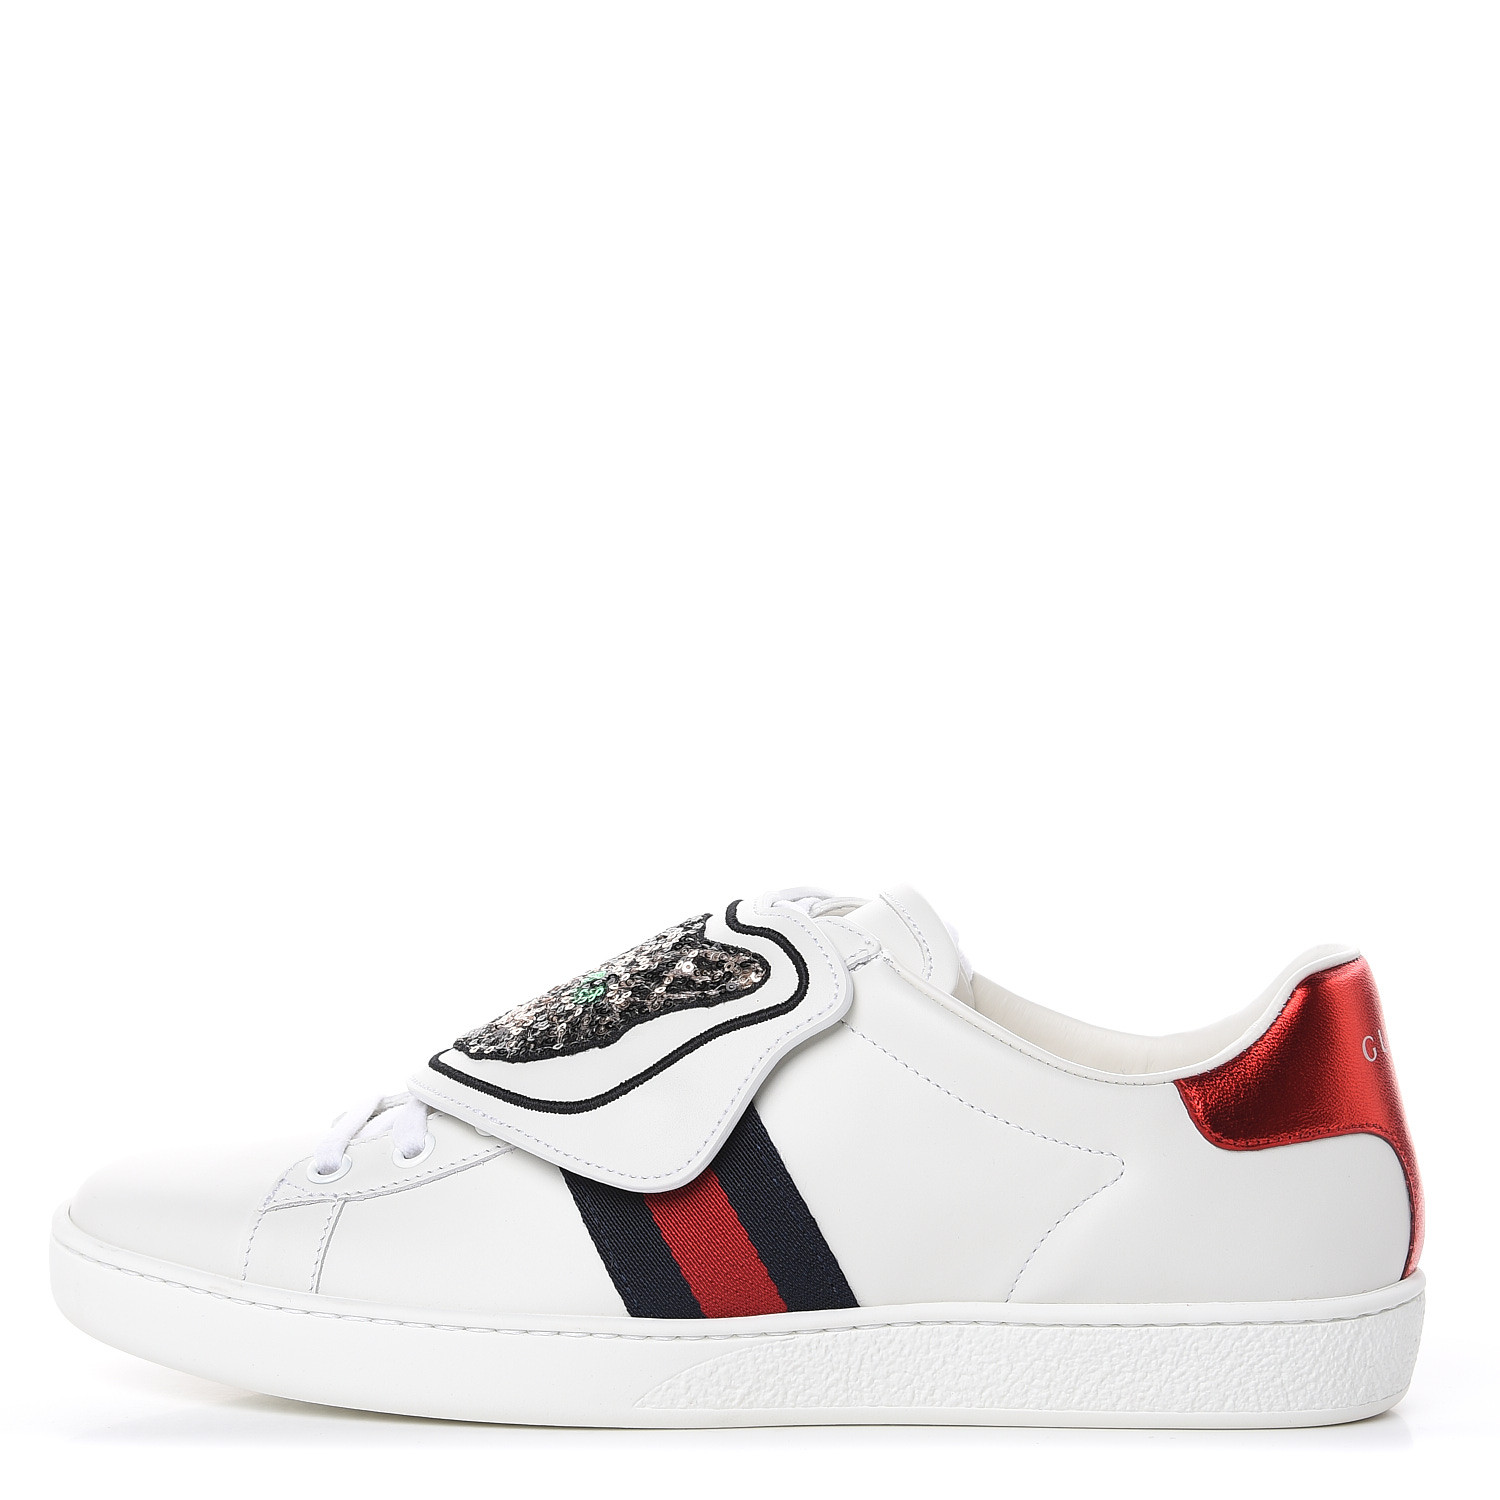 gucci womens sneakers